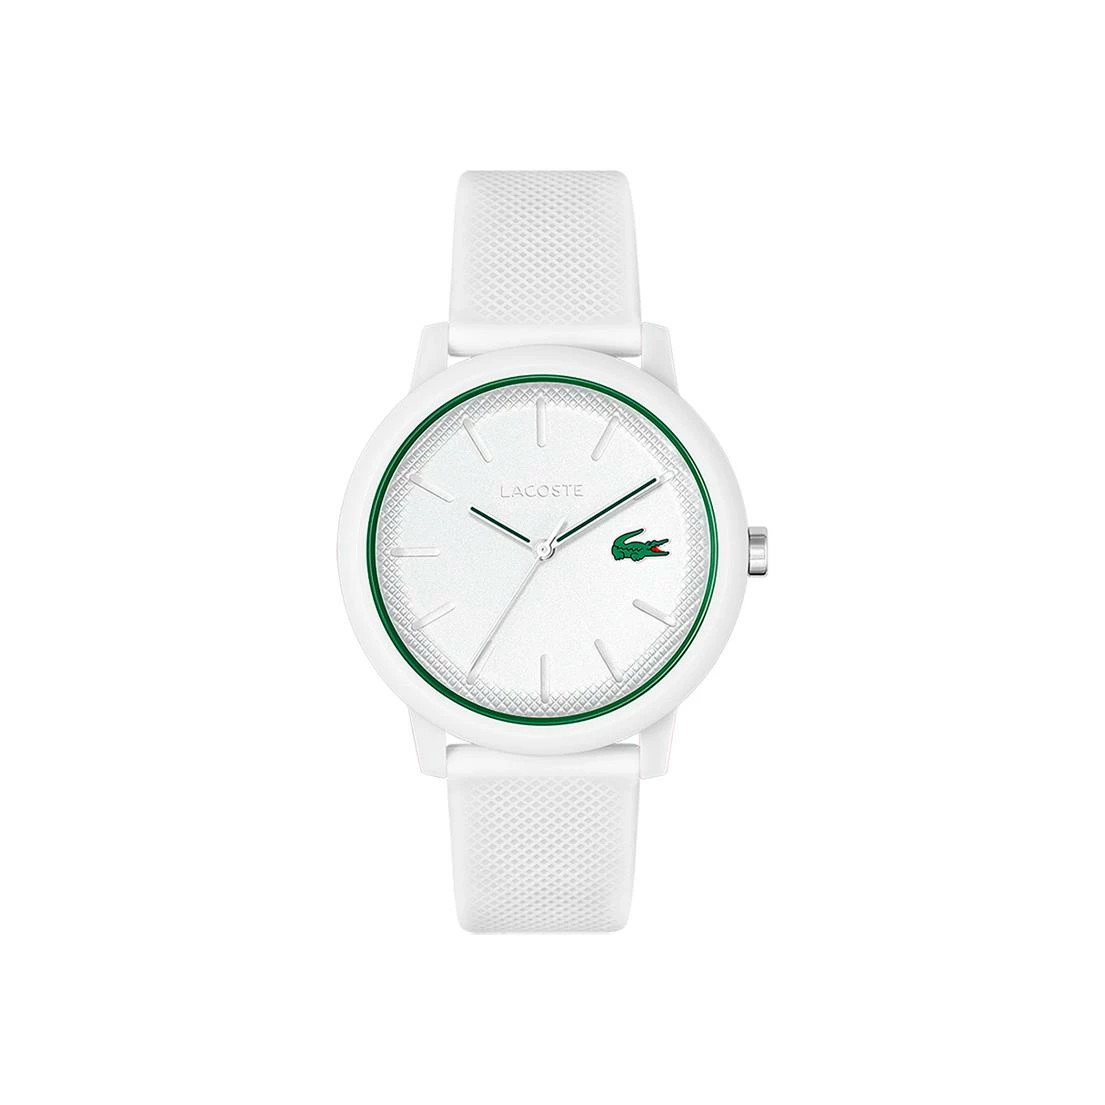 Montre Homme Lacoste 12.12 silicone blanc